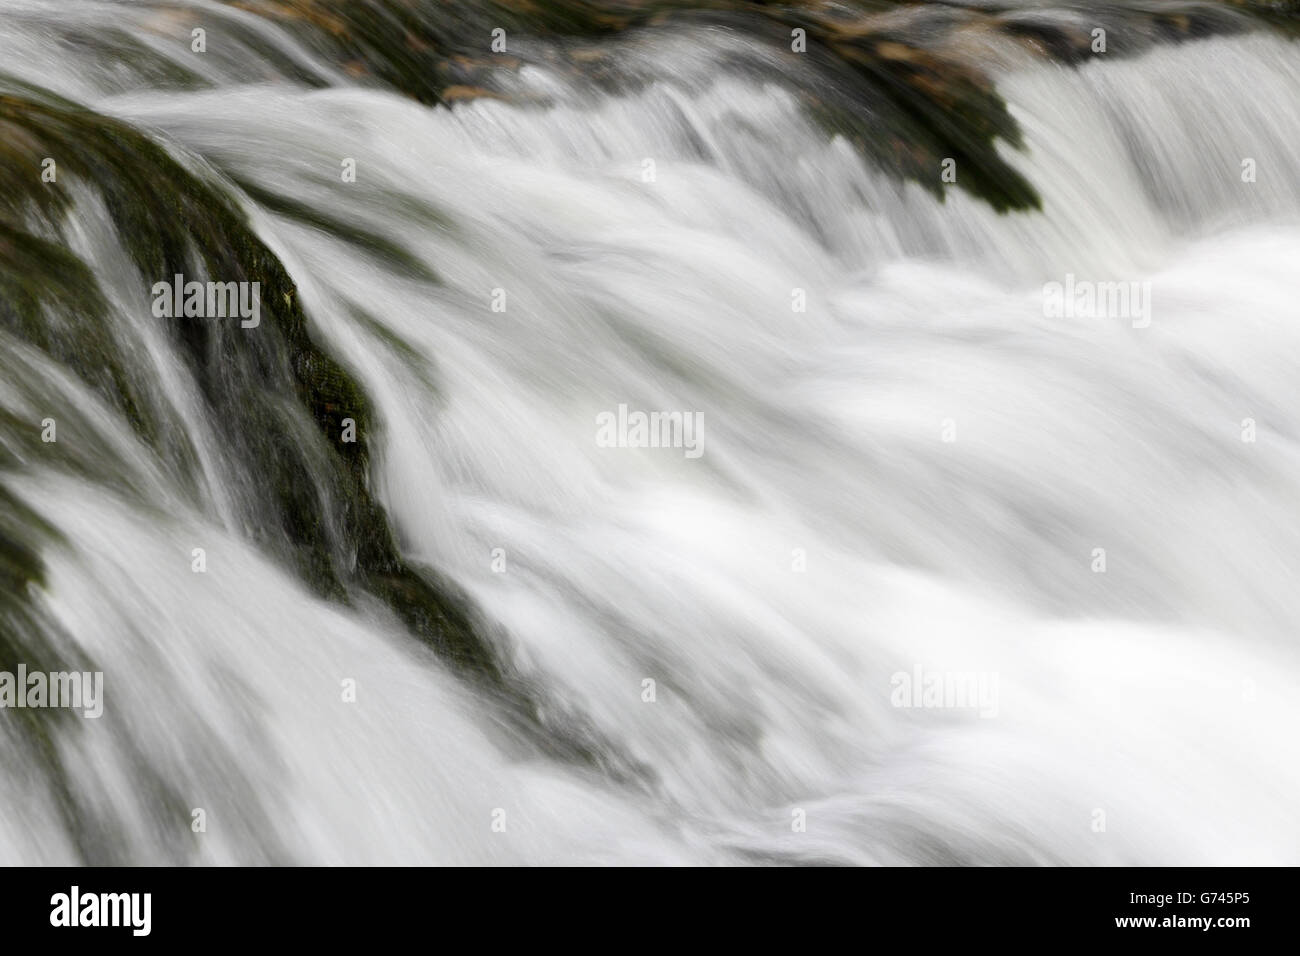 River Gauchach, Gauchach gorge, Black Forest, Baden-Wurttemberg, Germany Stock Photo